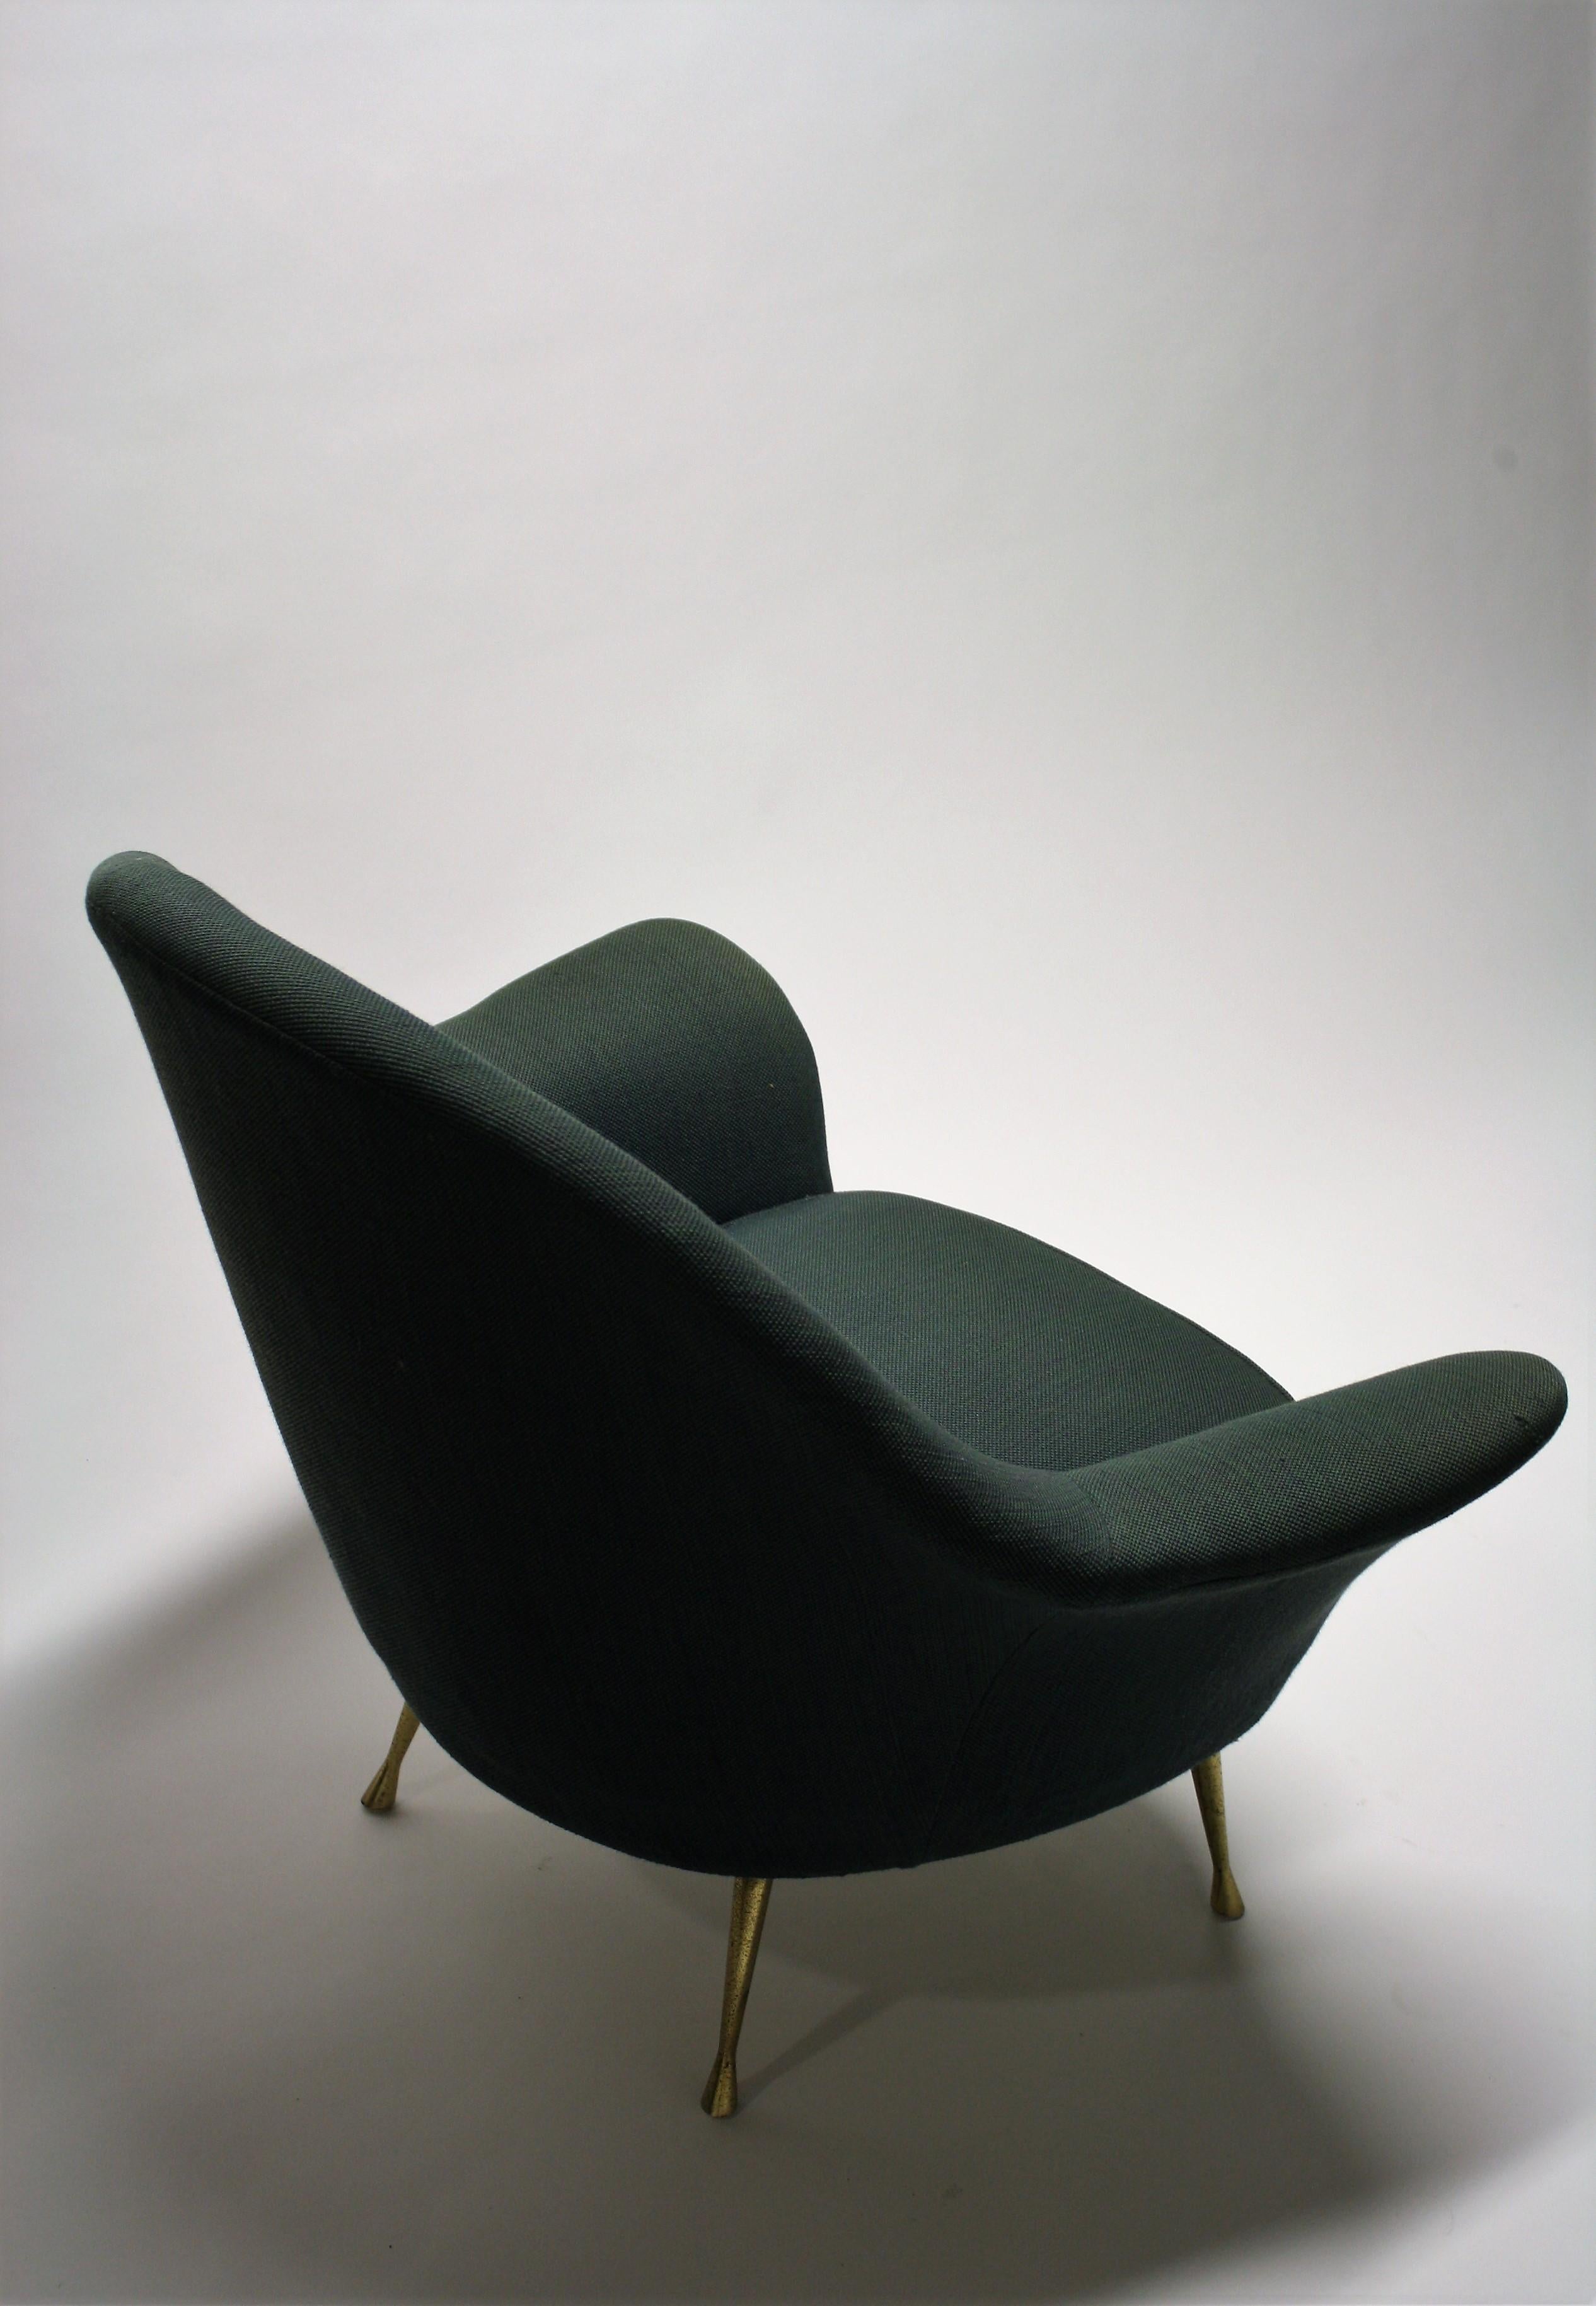 Brass Vintage Italian Lounge Chair or Club Chair, 1950s